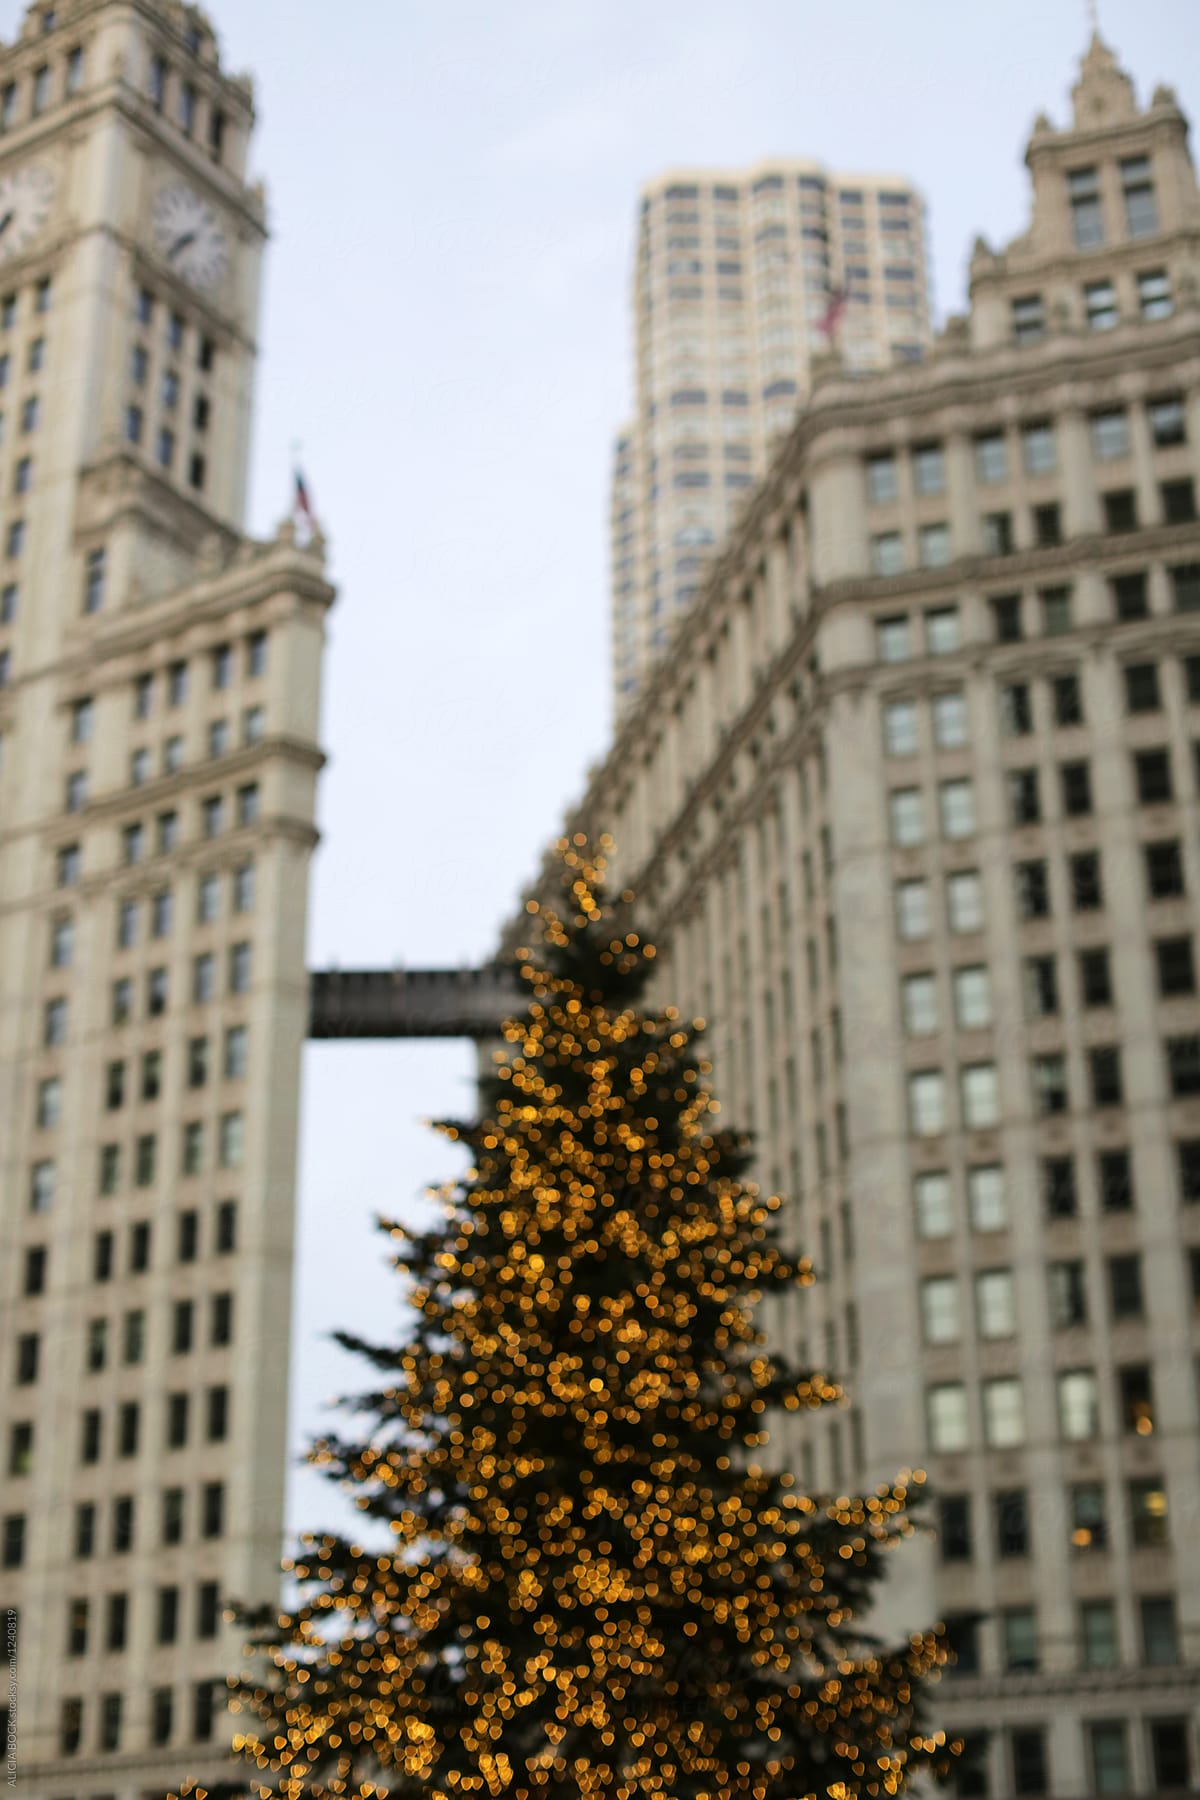 "A Christmas Tree Filled With Sparkling Lights In Downtown Chicago